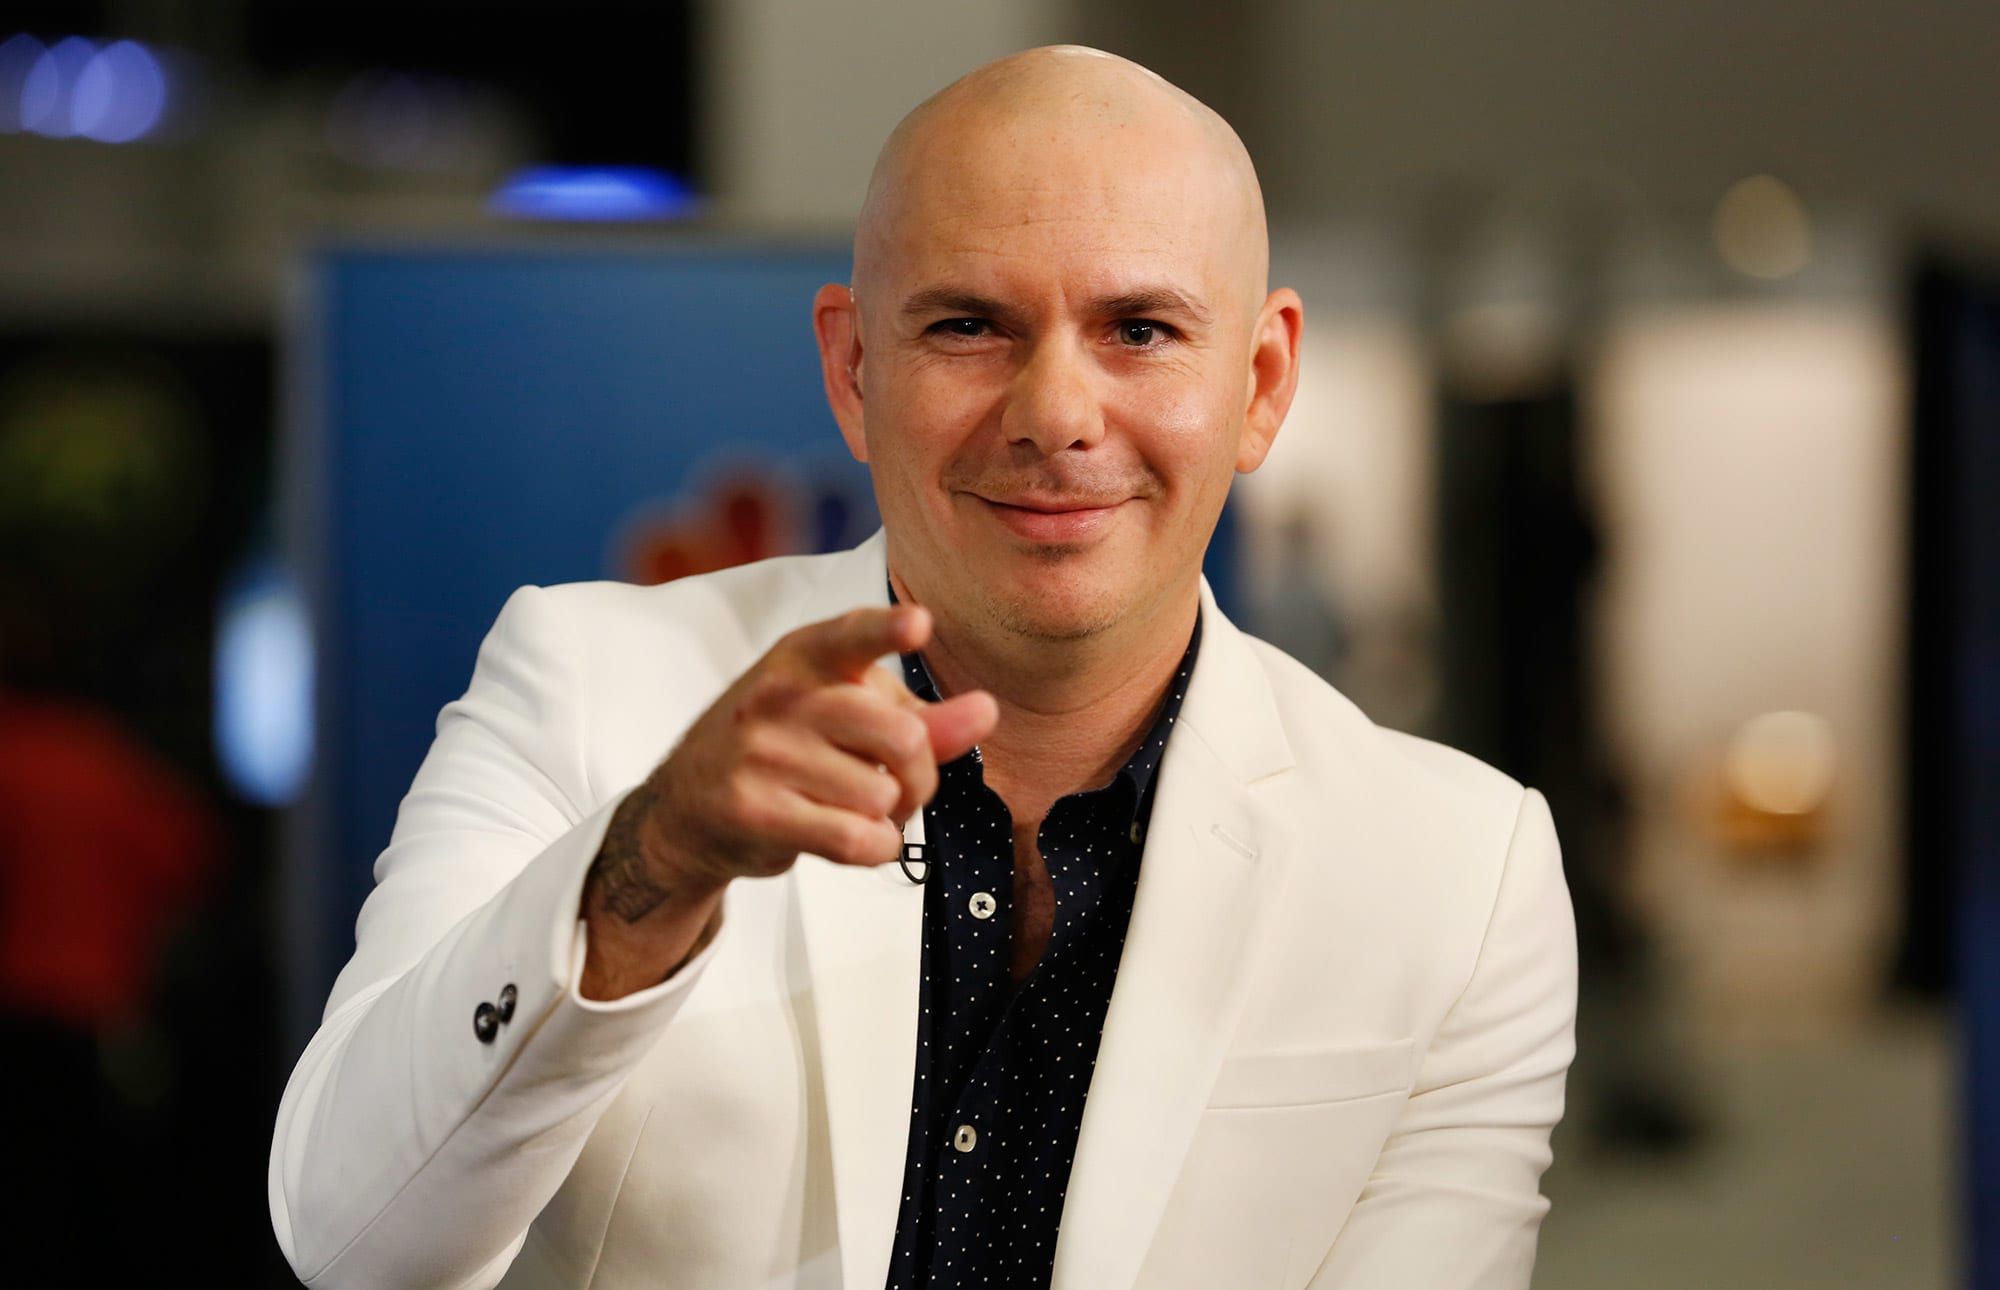 Who Is Rapper Pitbull? Does He Have A Secret Wife?